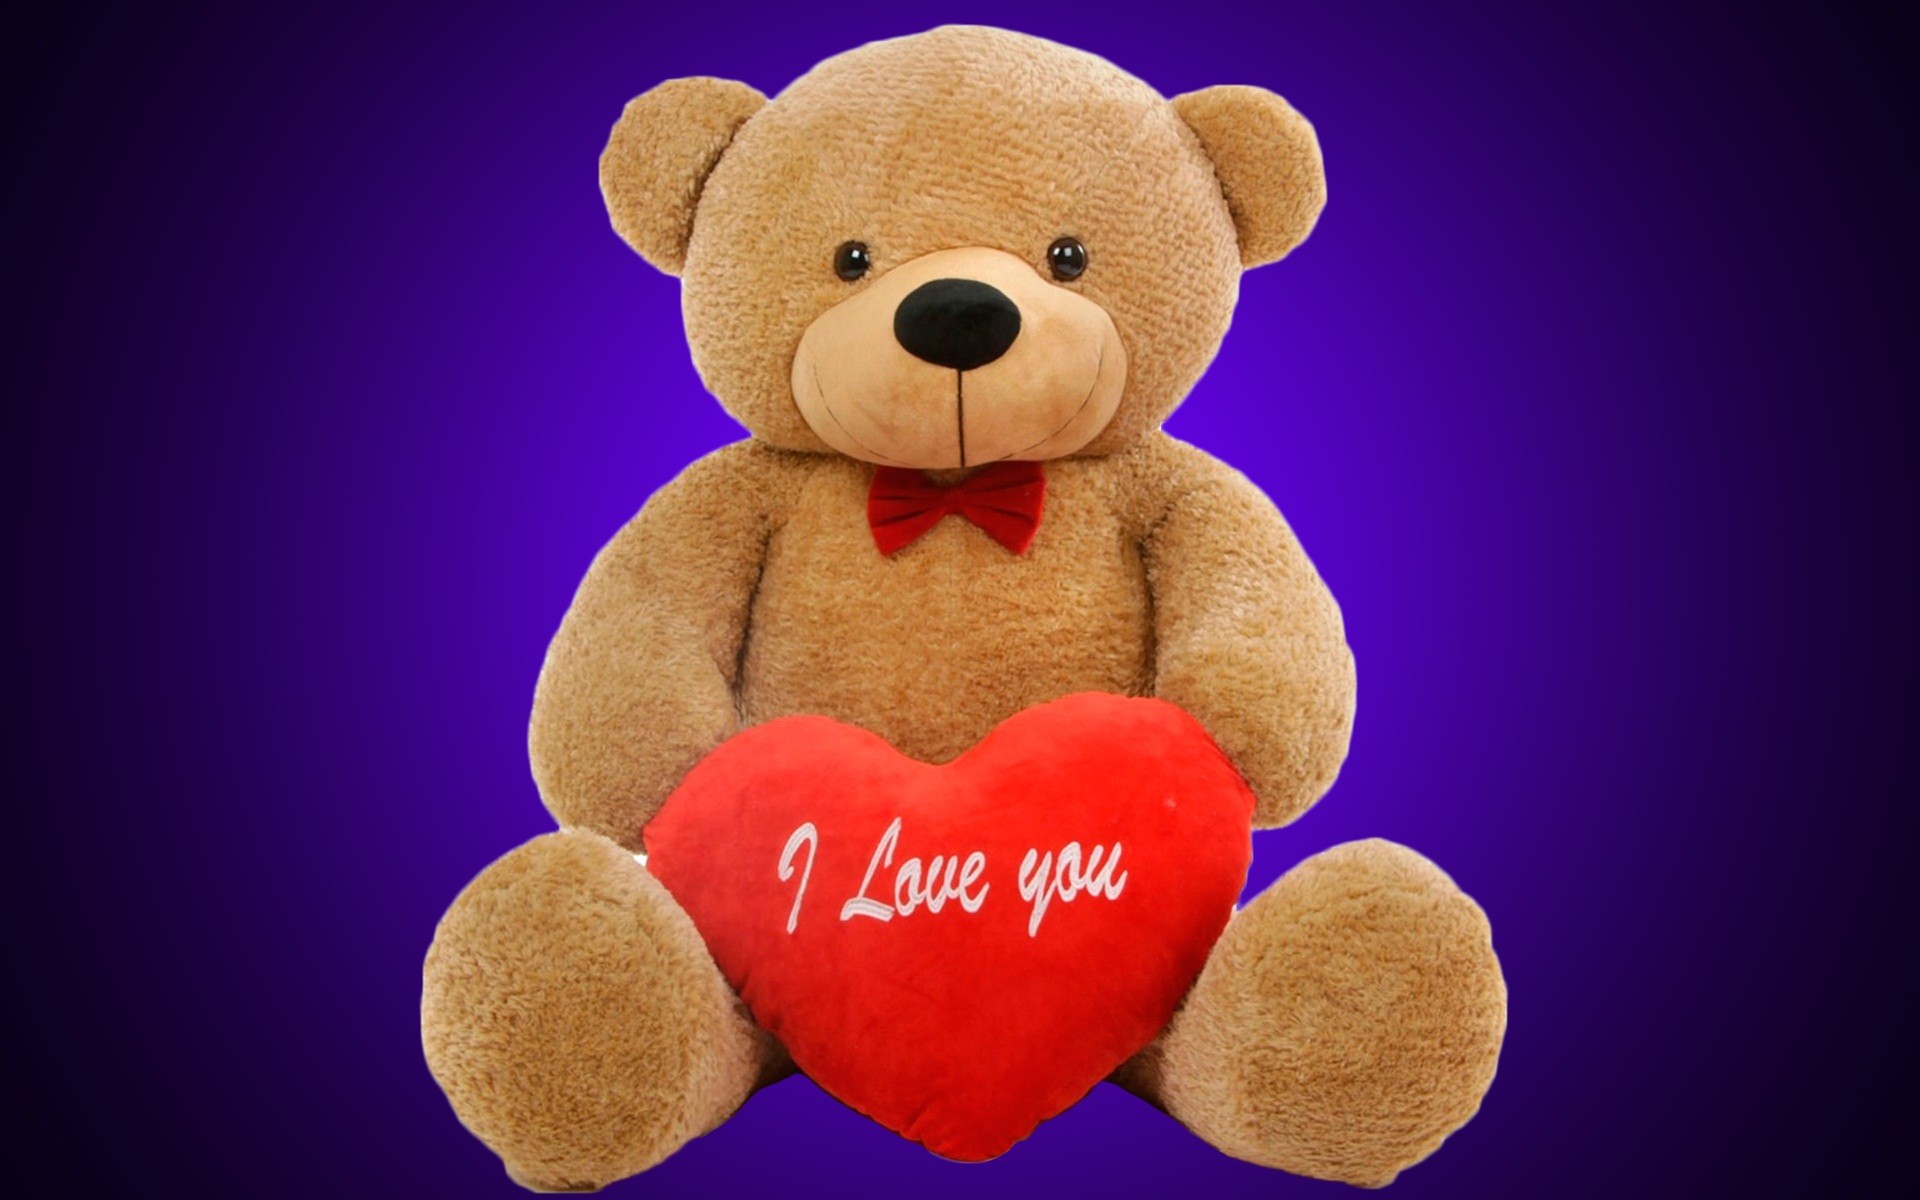 Cute Red Teddy Bear Wallpapers - Happy Valentines Day Teddy - HD Wallpaper 